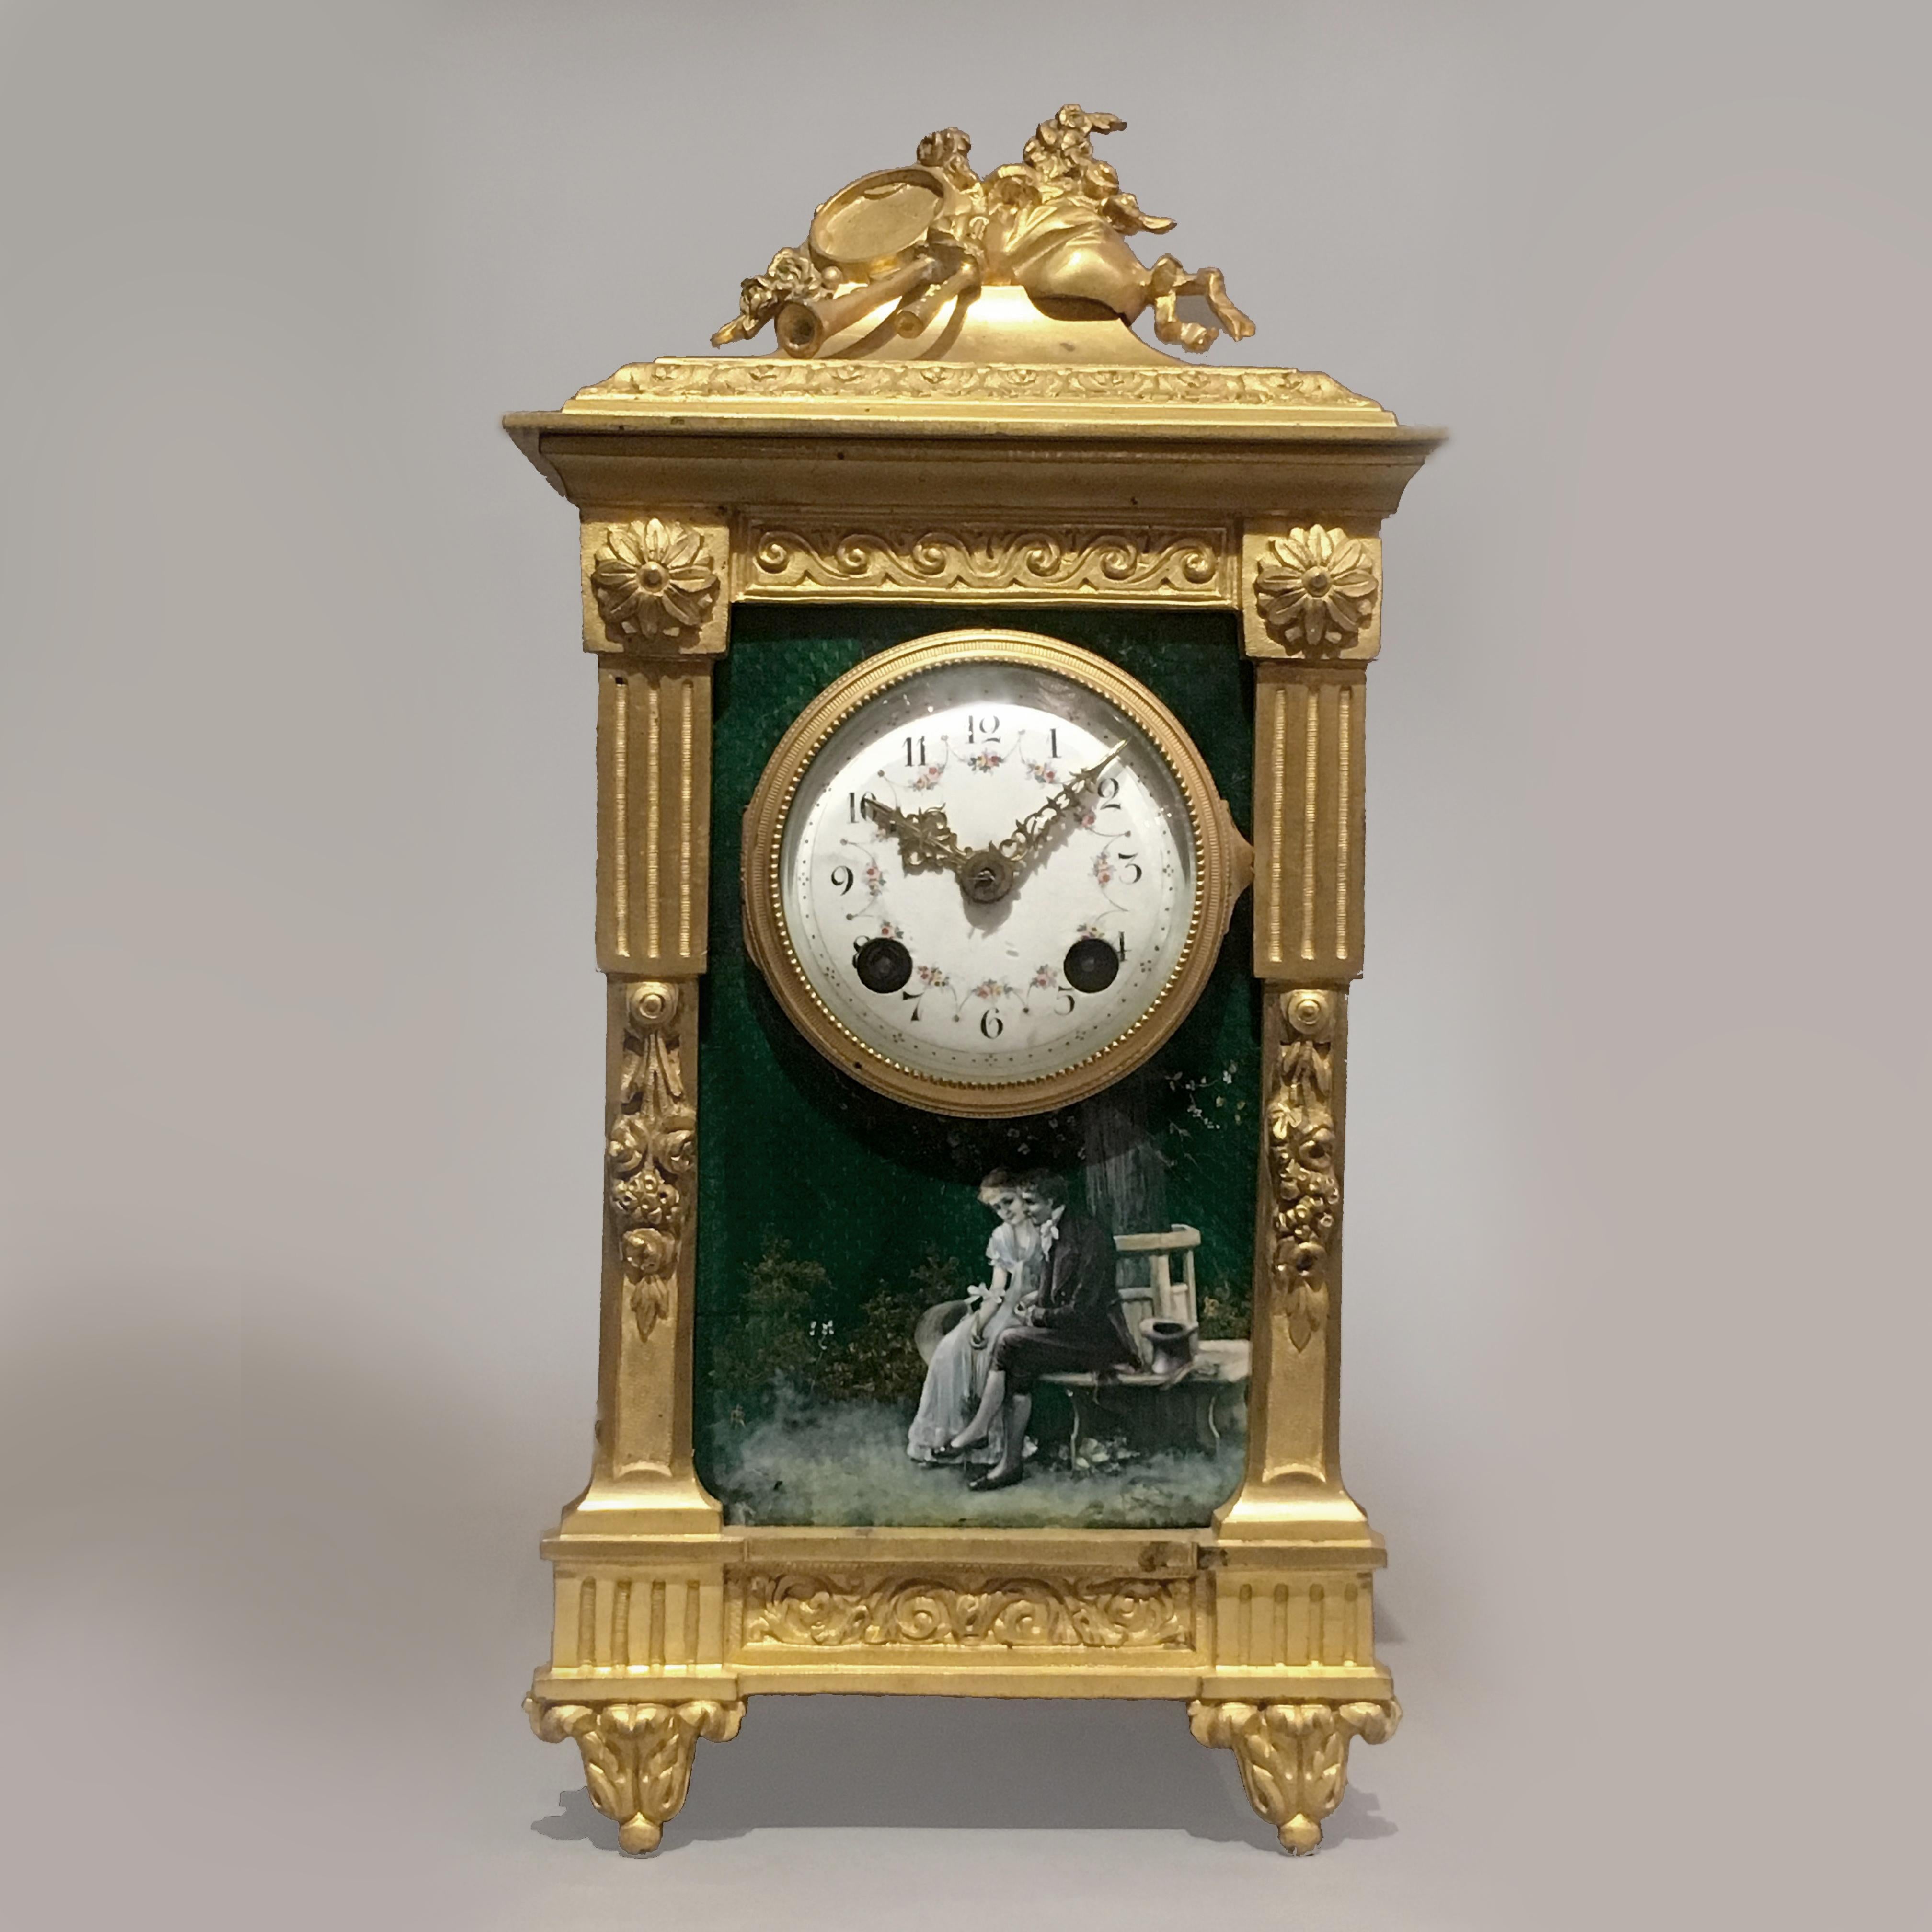 A Fine Louis XVI Style Gilt-Bronze and Green Enamel Mantel Clock.

French, Circa 1890.

Stamped ‘Medaille d’Argent Vincenti & Cie 1855’ and with the initials ‘L.R’.

This fine clock or timepiece has a spring-driven eight-day twin train